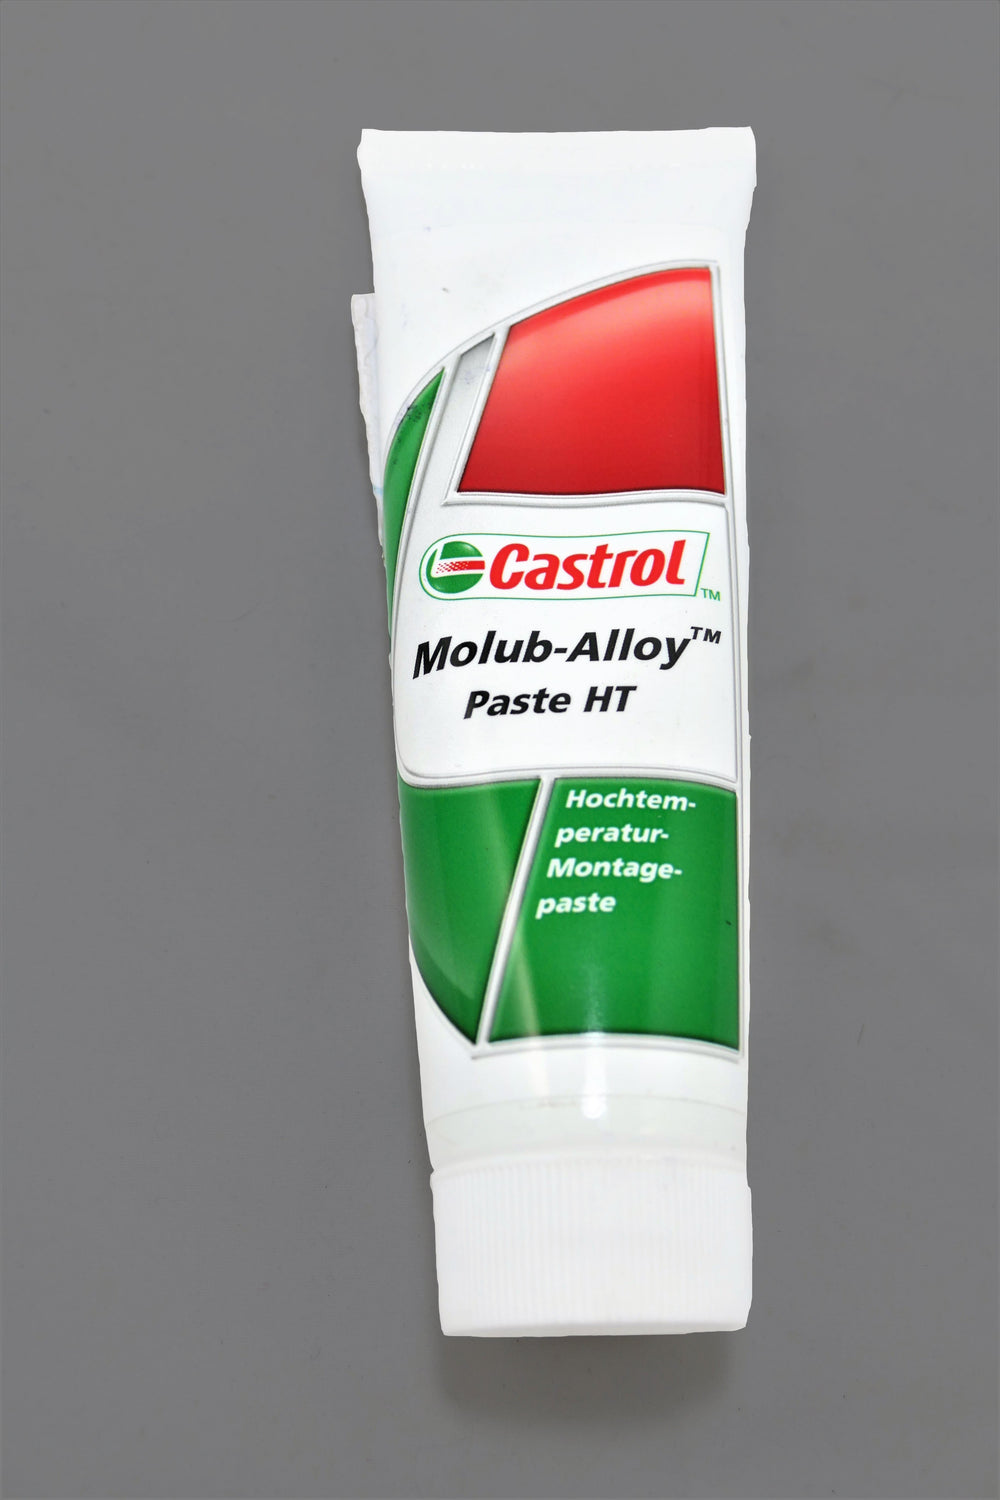 A tube of Castrol Optimoly HT Mounting Paste.  